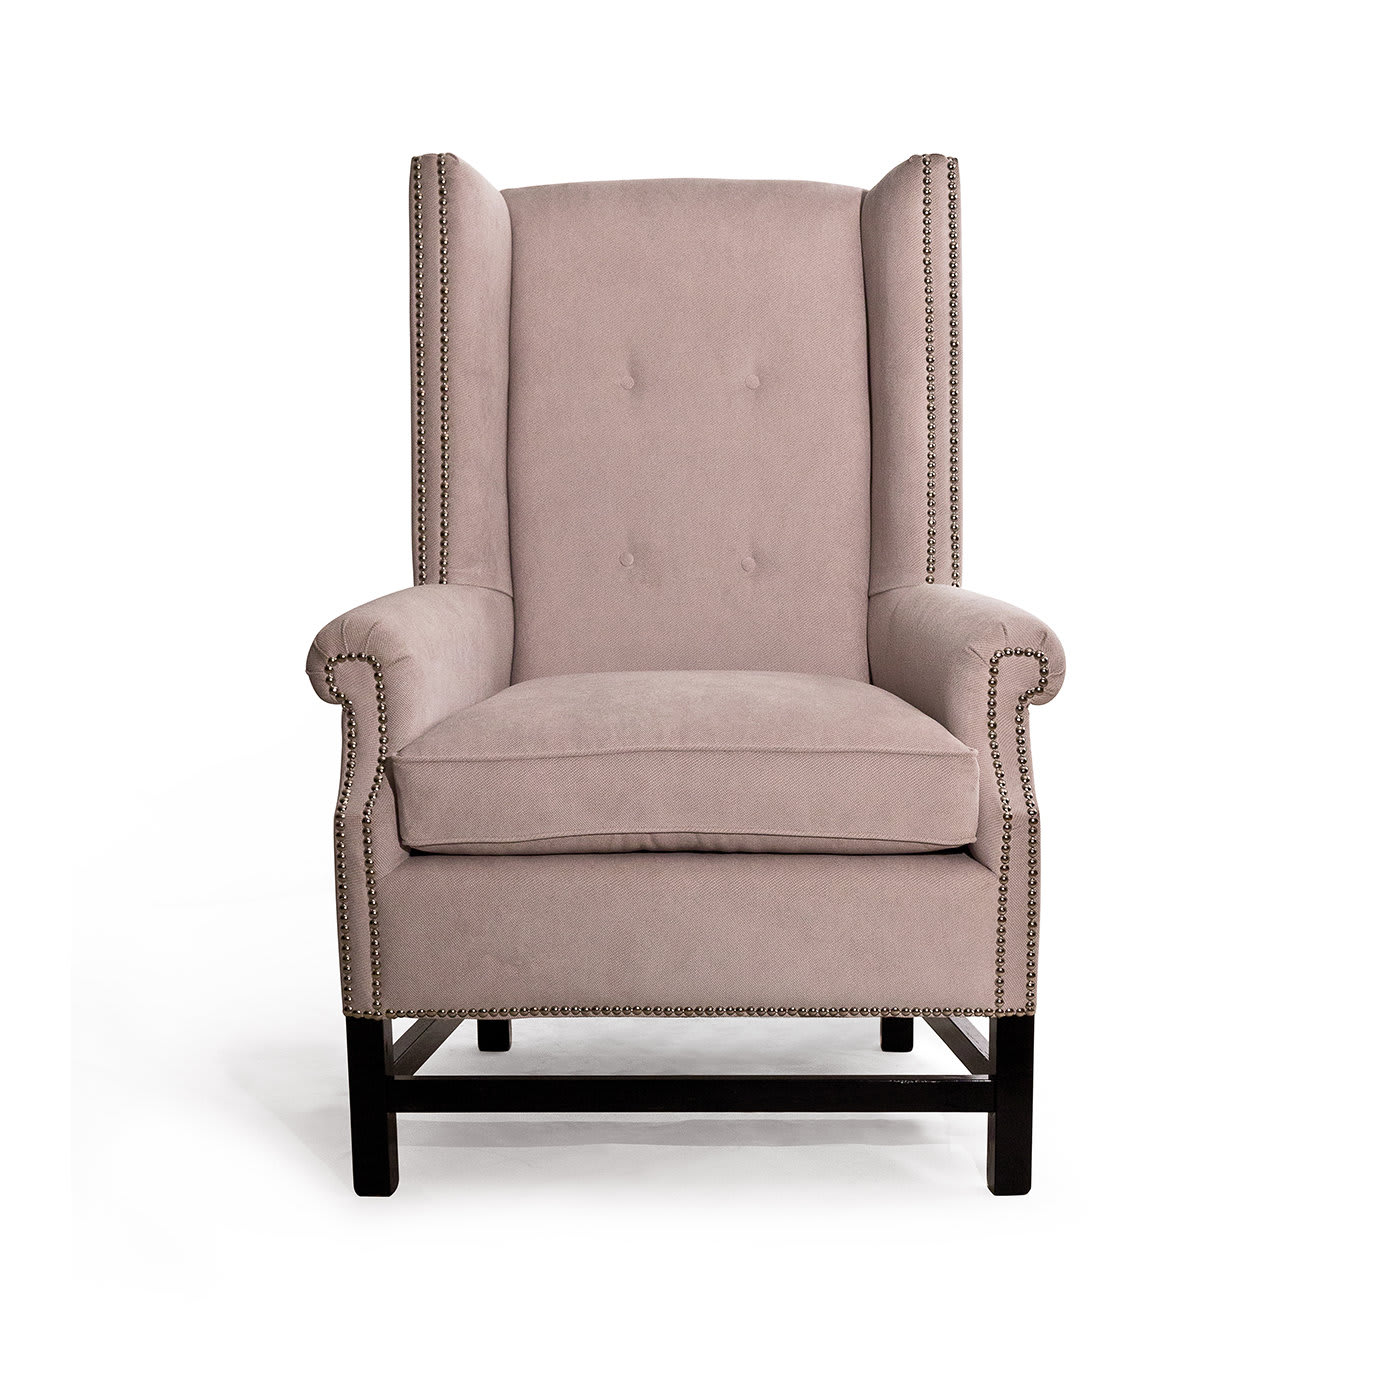 Studded Antique Pink Armchair - Palmobili